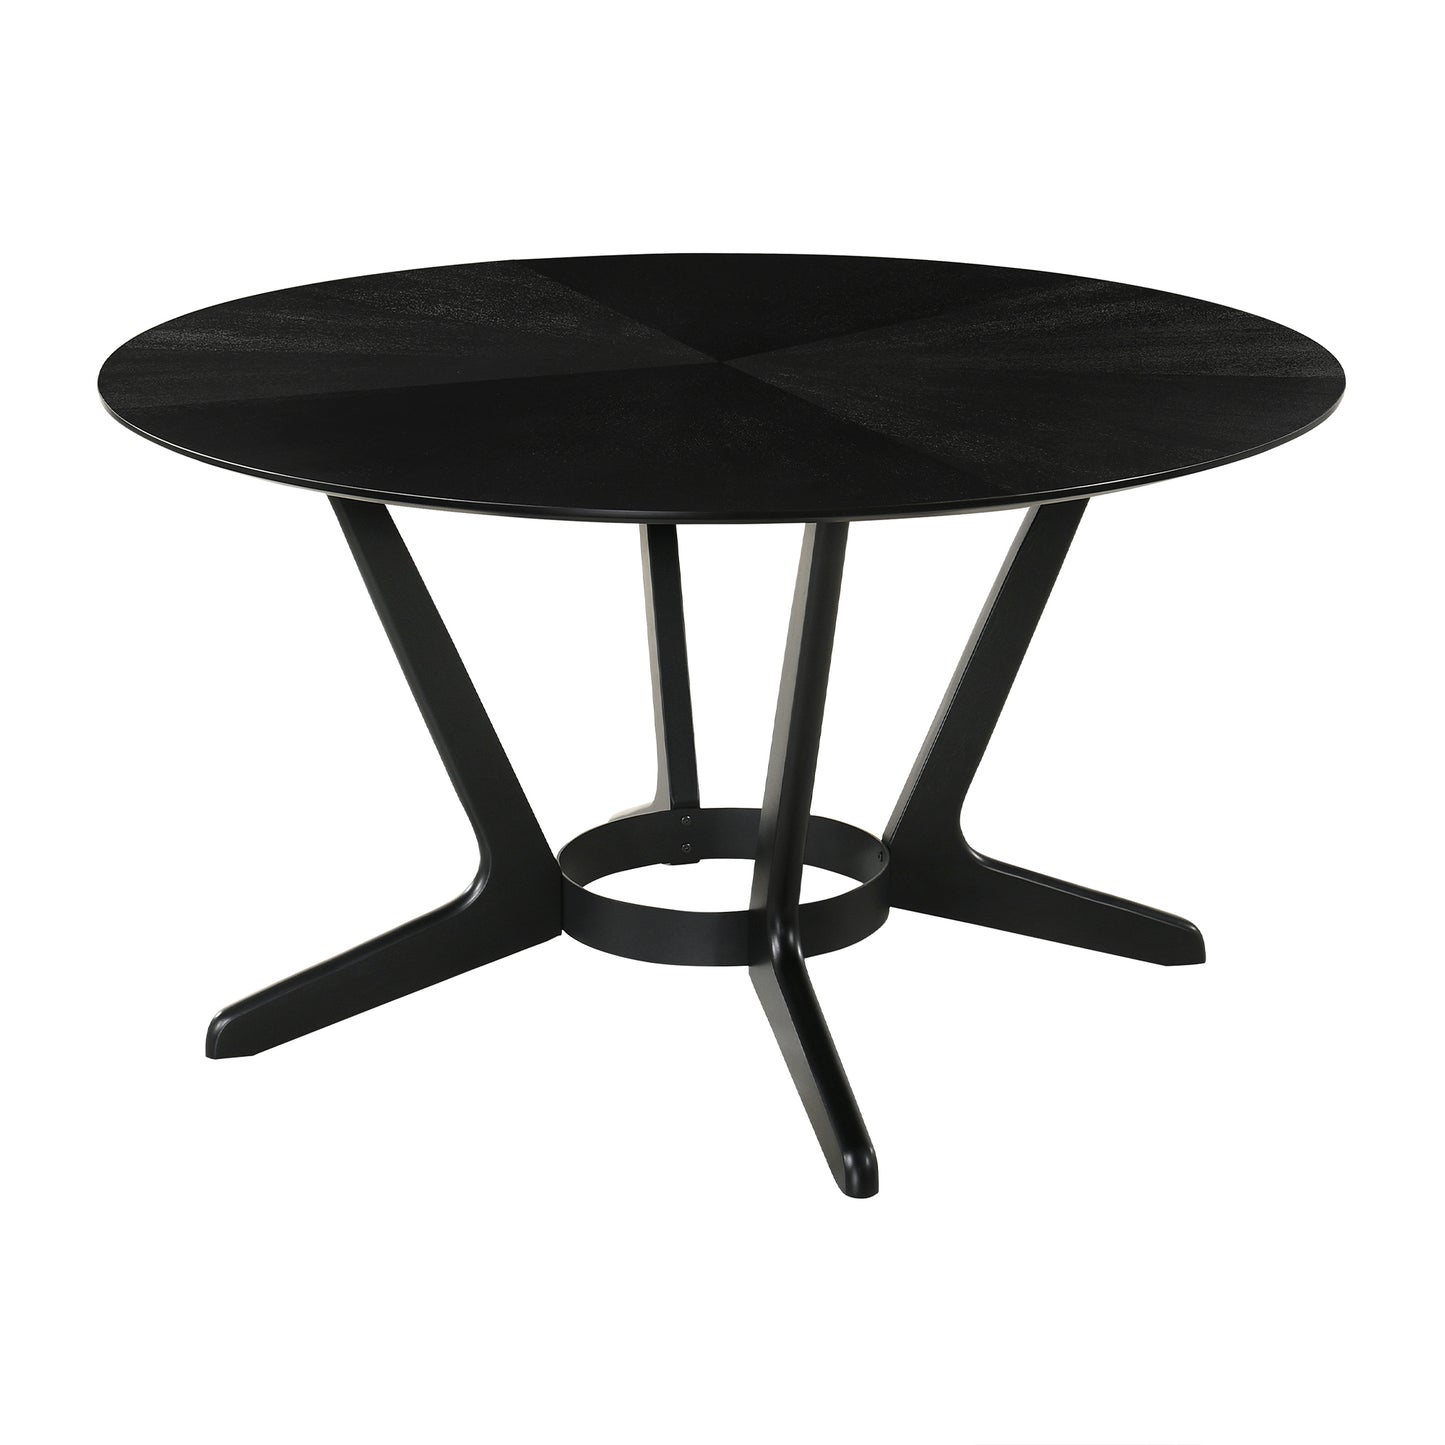 Santana 7 Piece Round Black Wood Dining Table Set with Charcoal Fabric